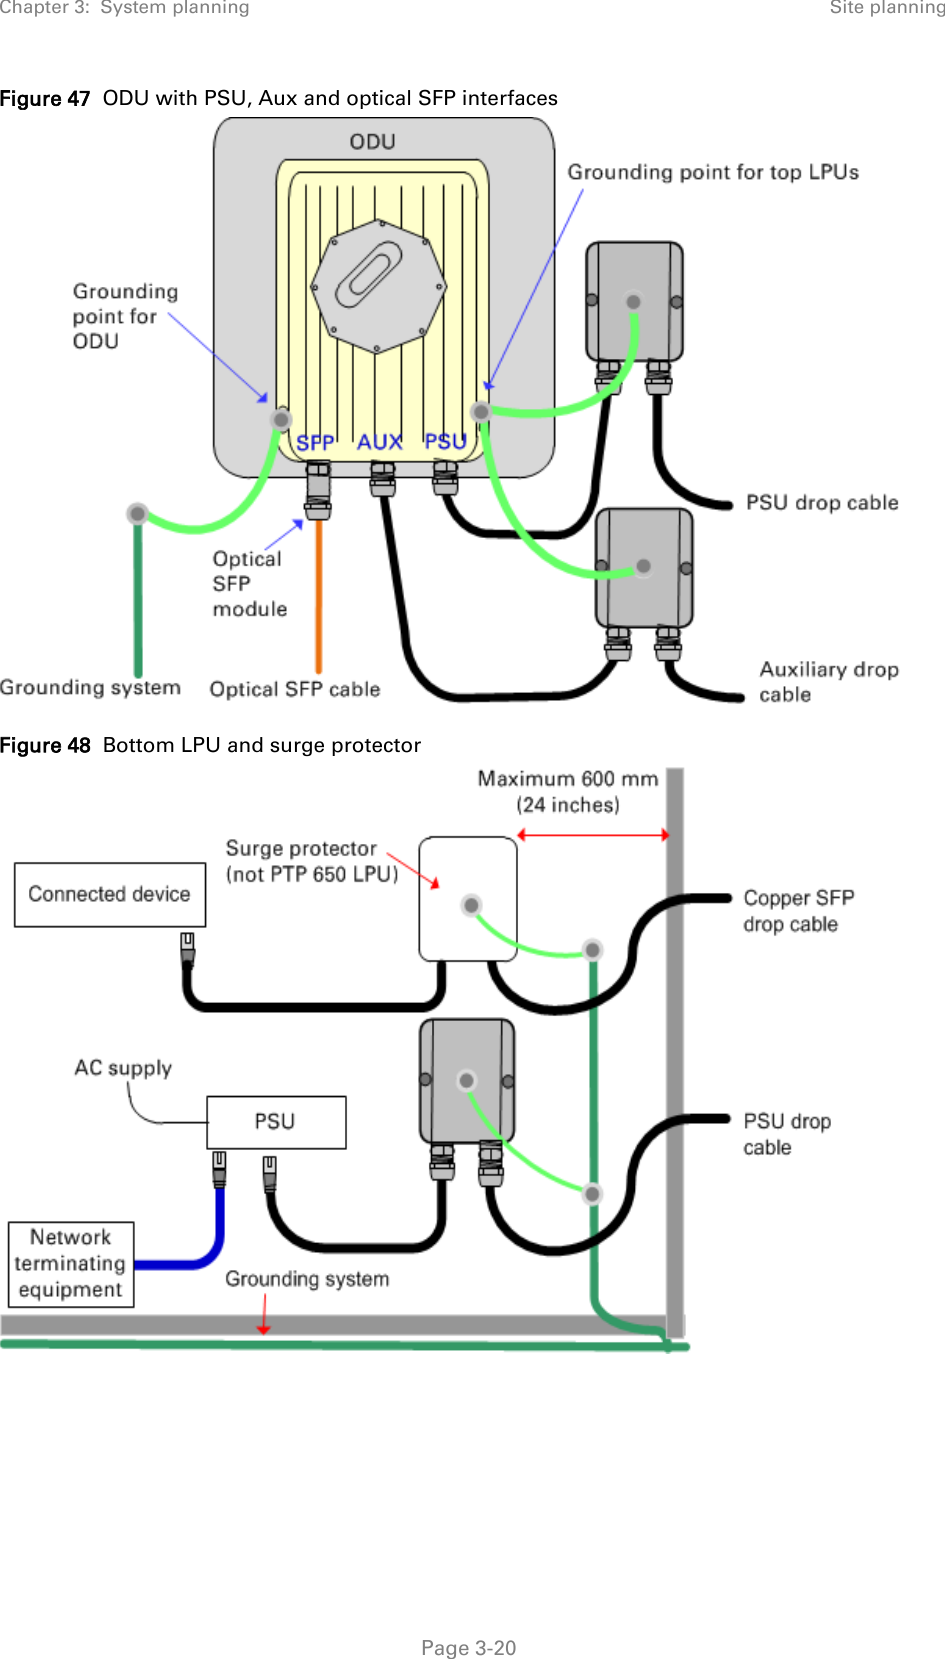 Chapter 3:  System planning Site planning  Figure 47  ODU with PSU, Aux and optical SFP interfaces  Figure 48  Bottom LPU and surge protector    Page 3-20 